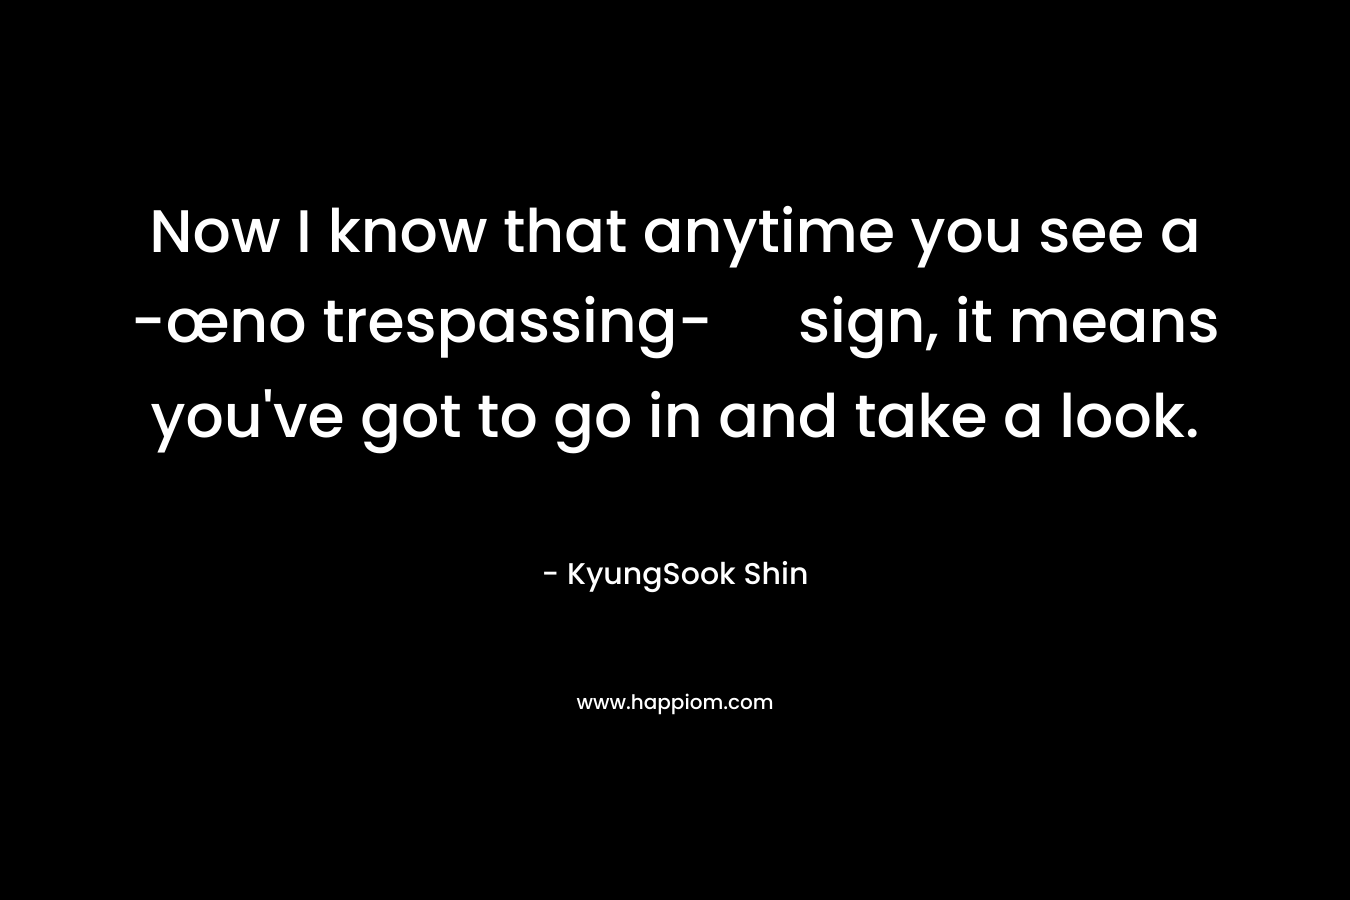 Now I know that anytime you see a -œno trespassing- sign, it means you’ve got to go in and take a look. – KyungSook Shin